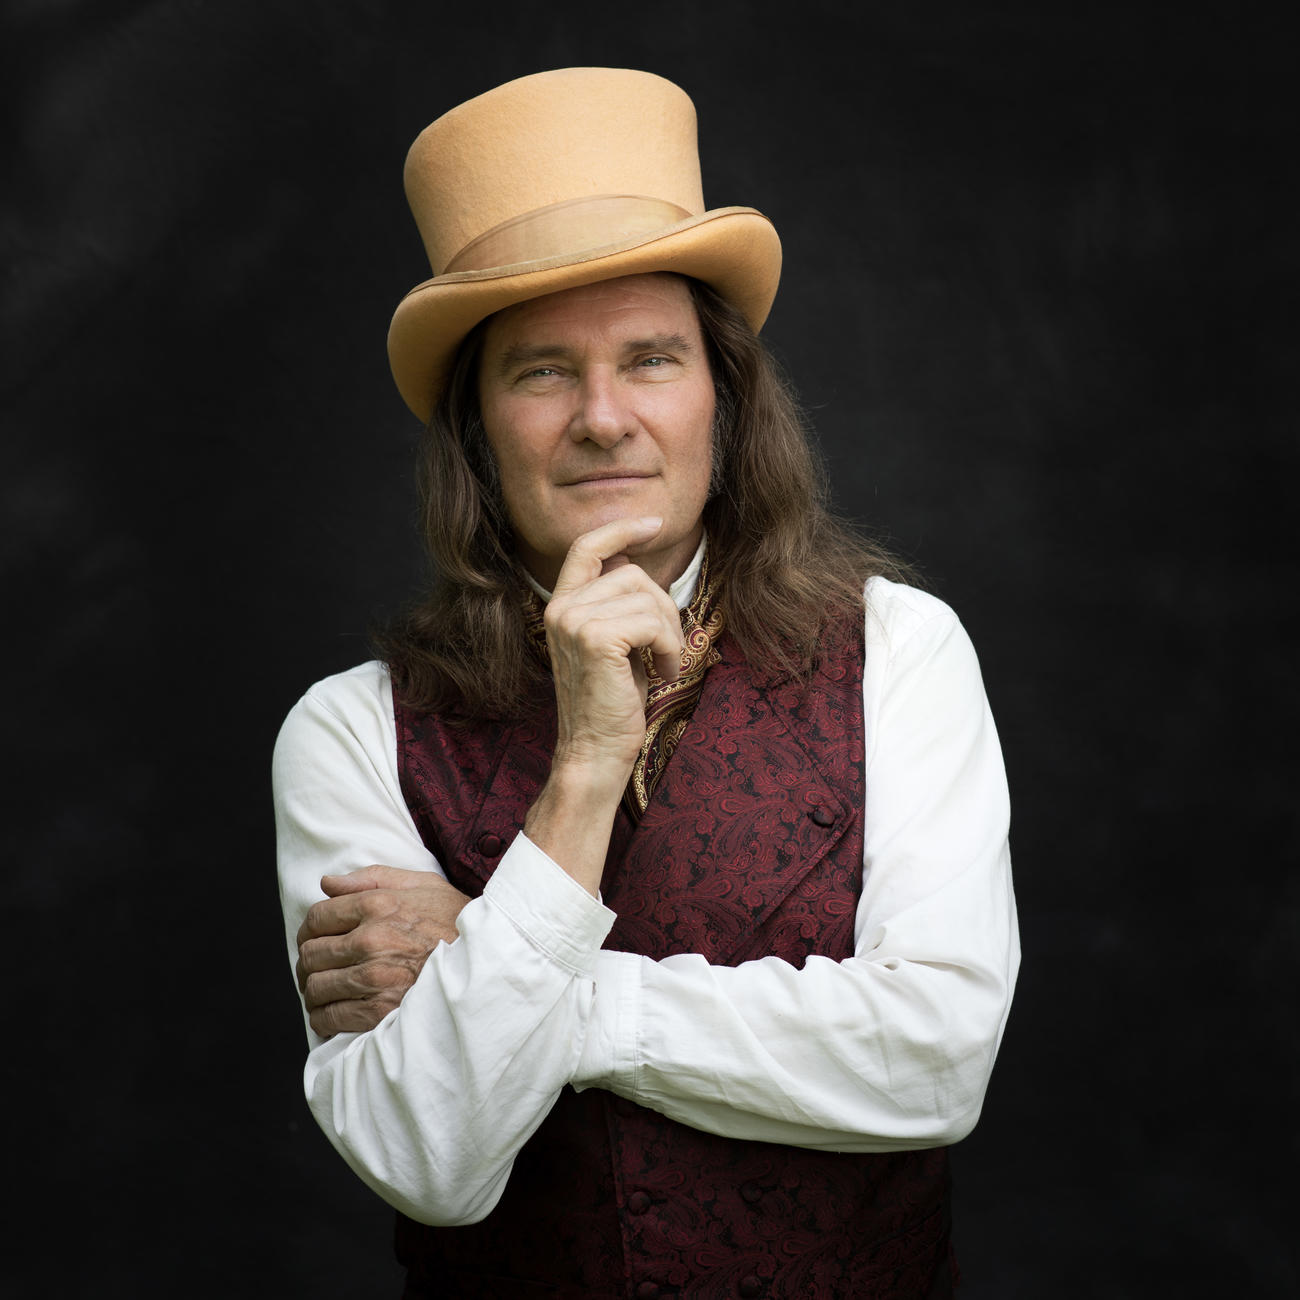 A white man in a top hat vest poses with his hand on his chin